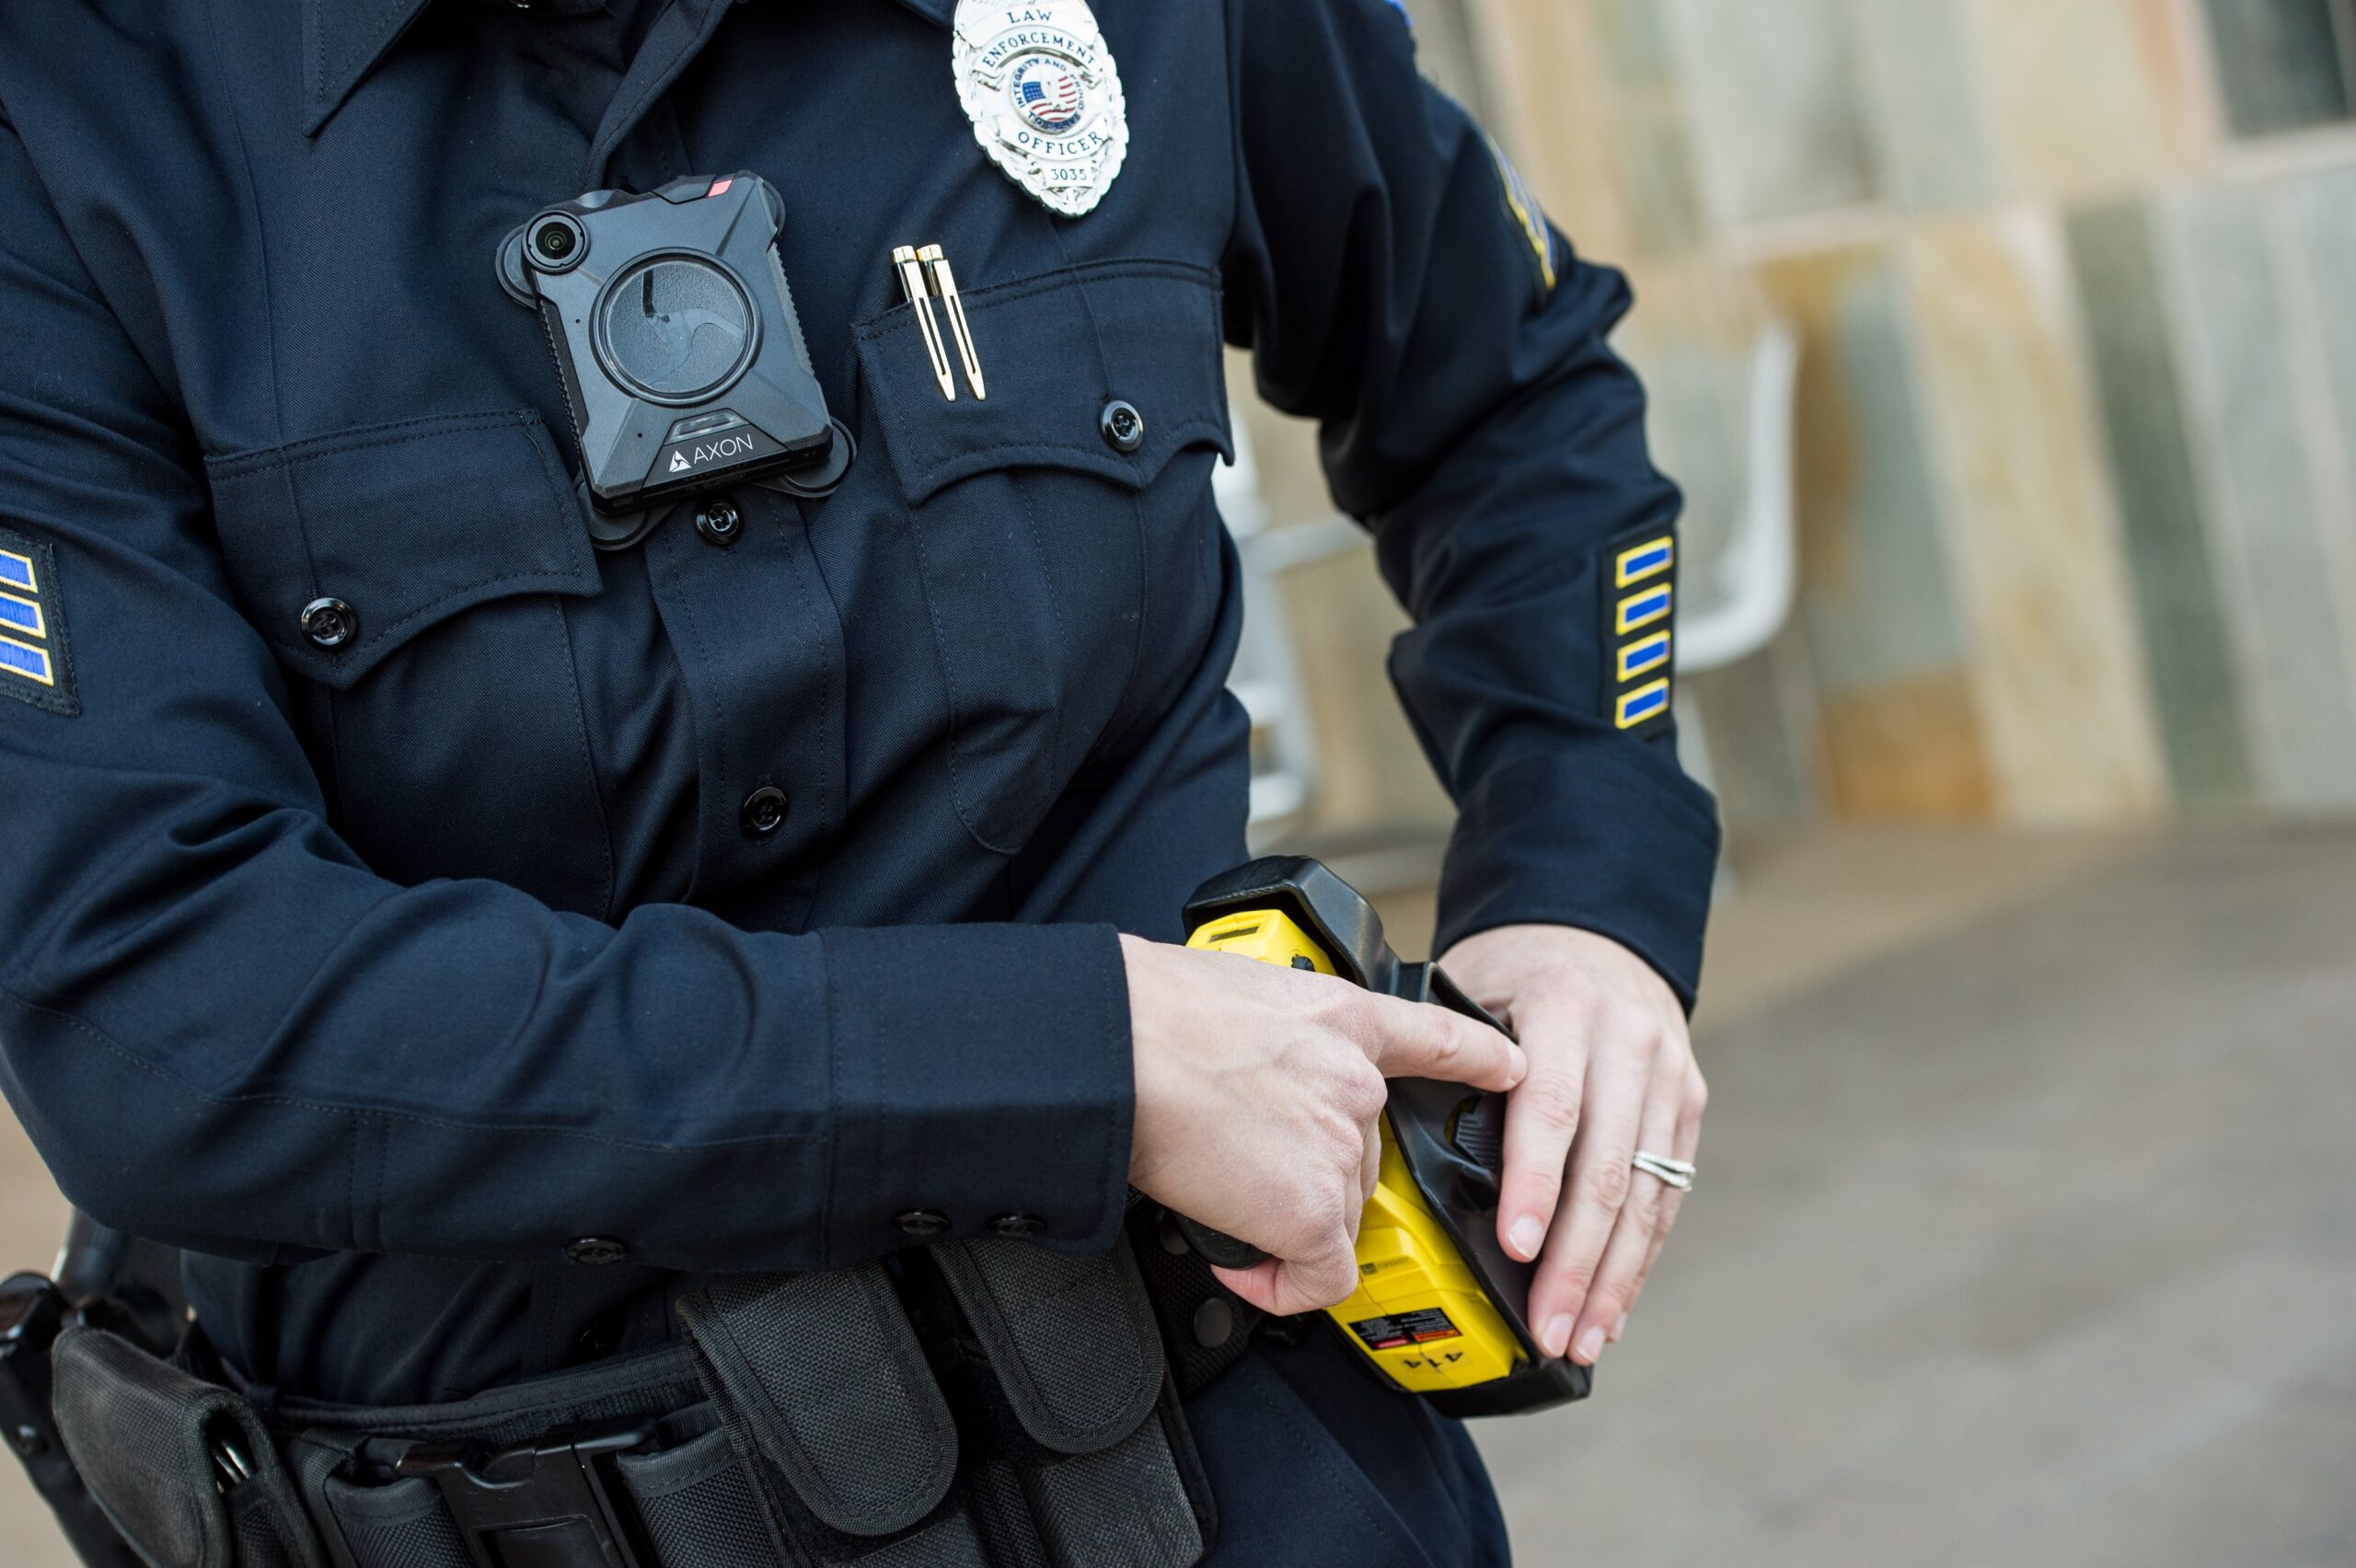 An officer reaches for their taser while wearing a body camera